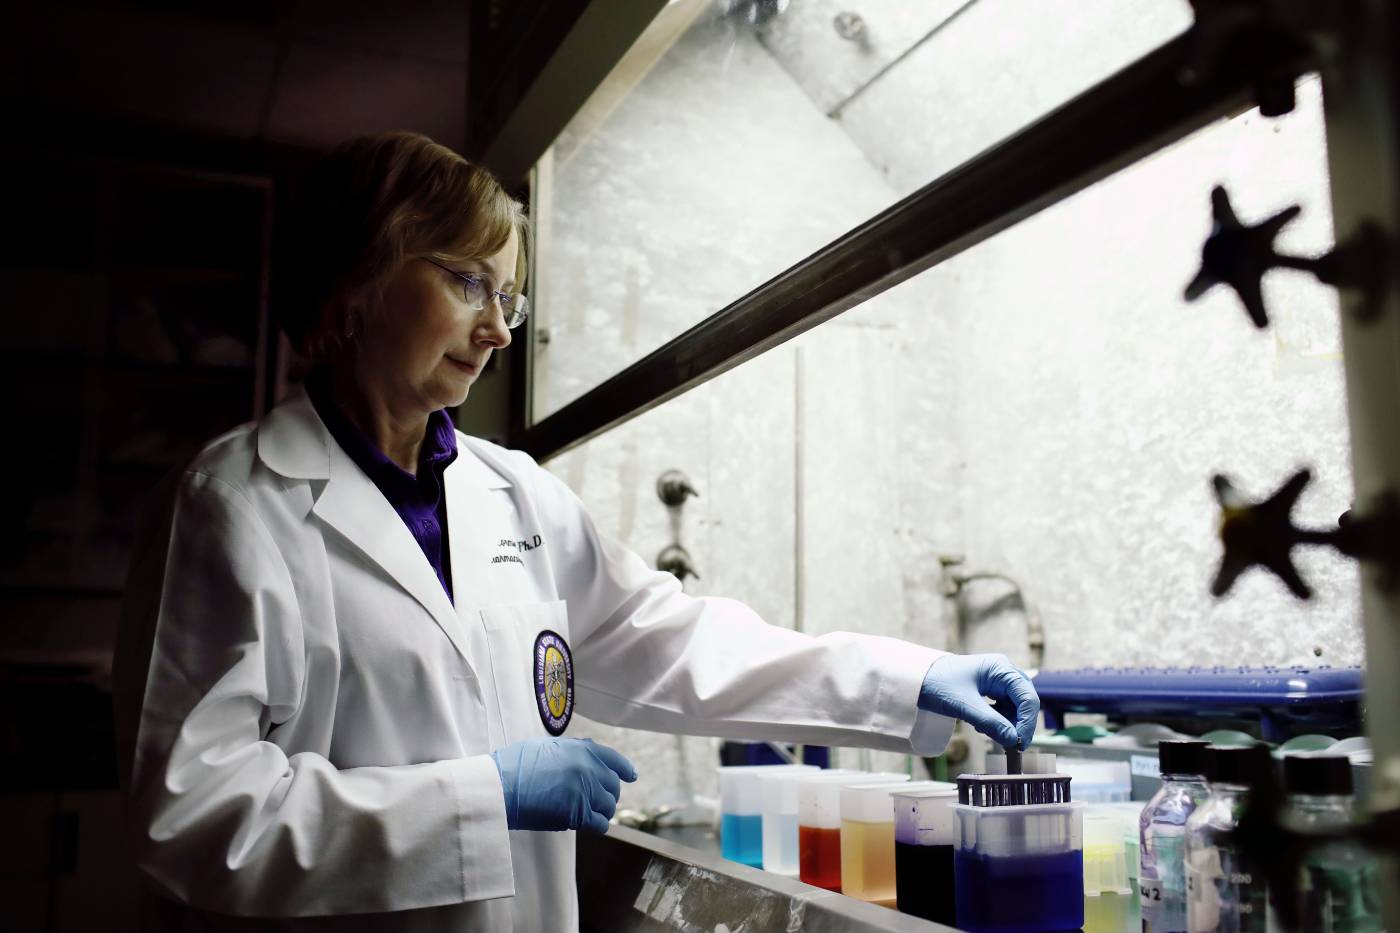 Researcher working in a lab setting